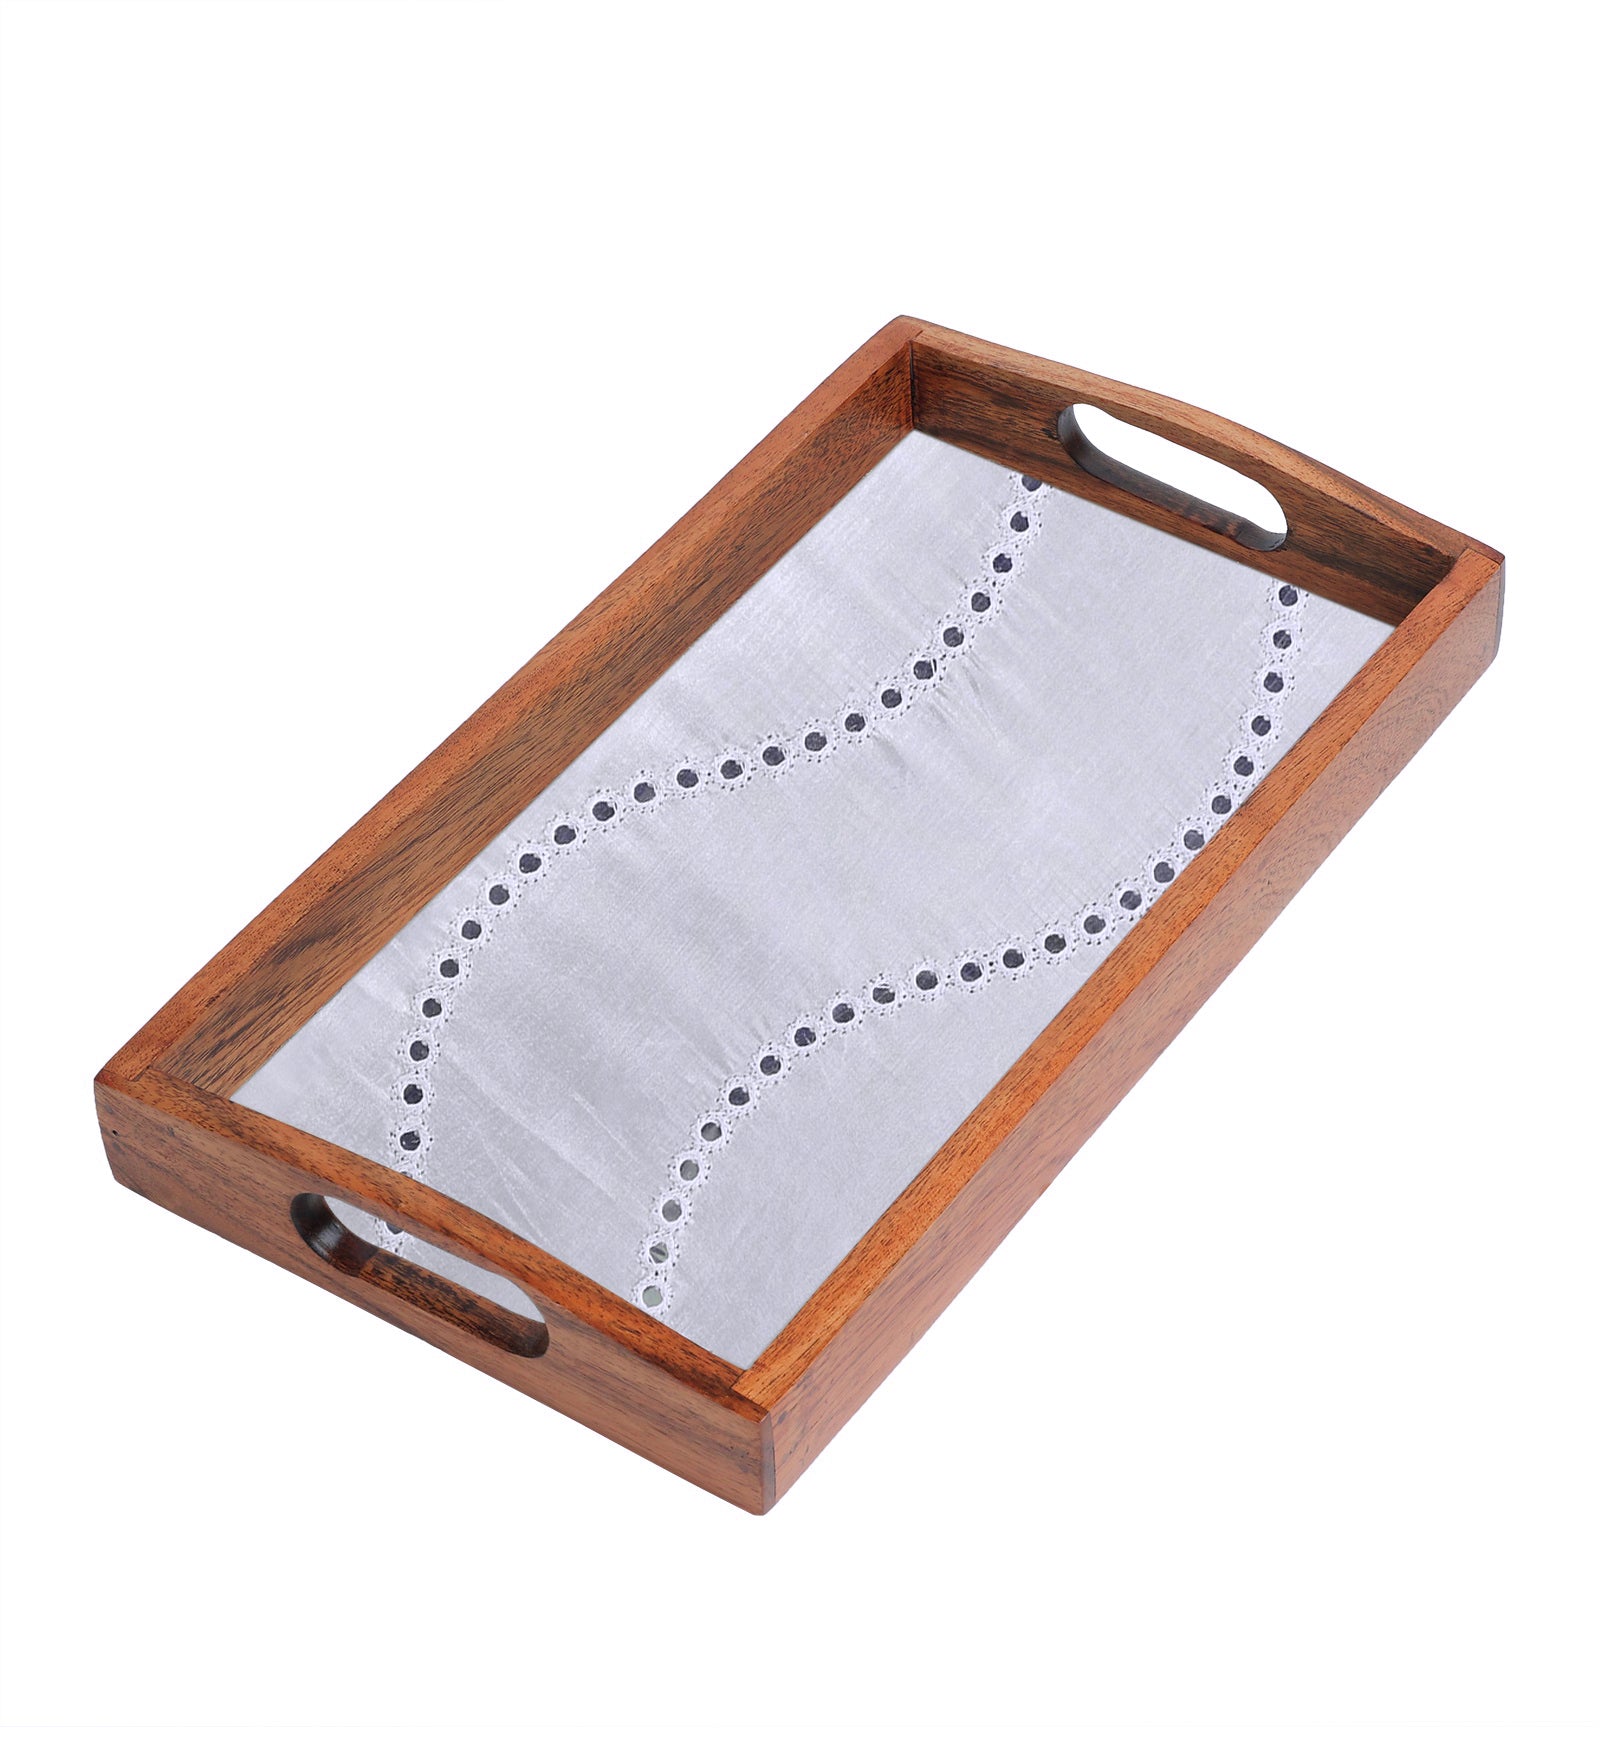 Decorative wooden serving tray 16"X 10"